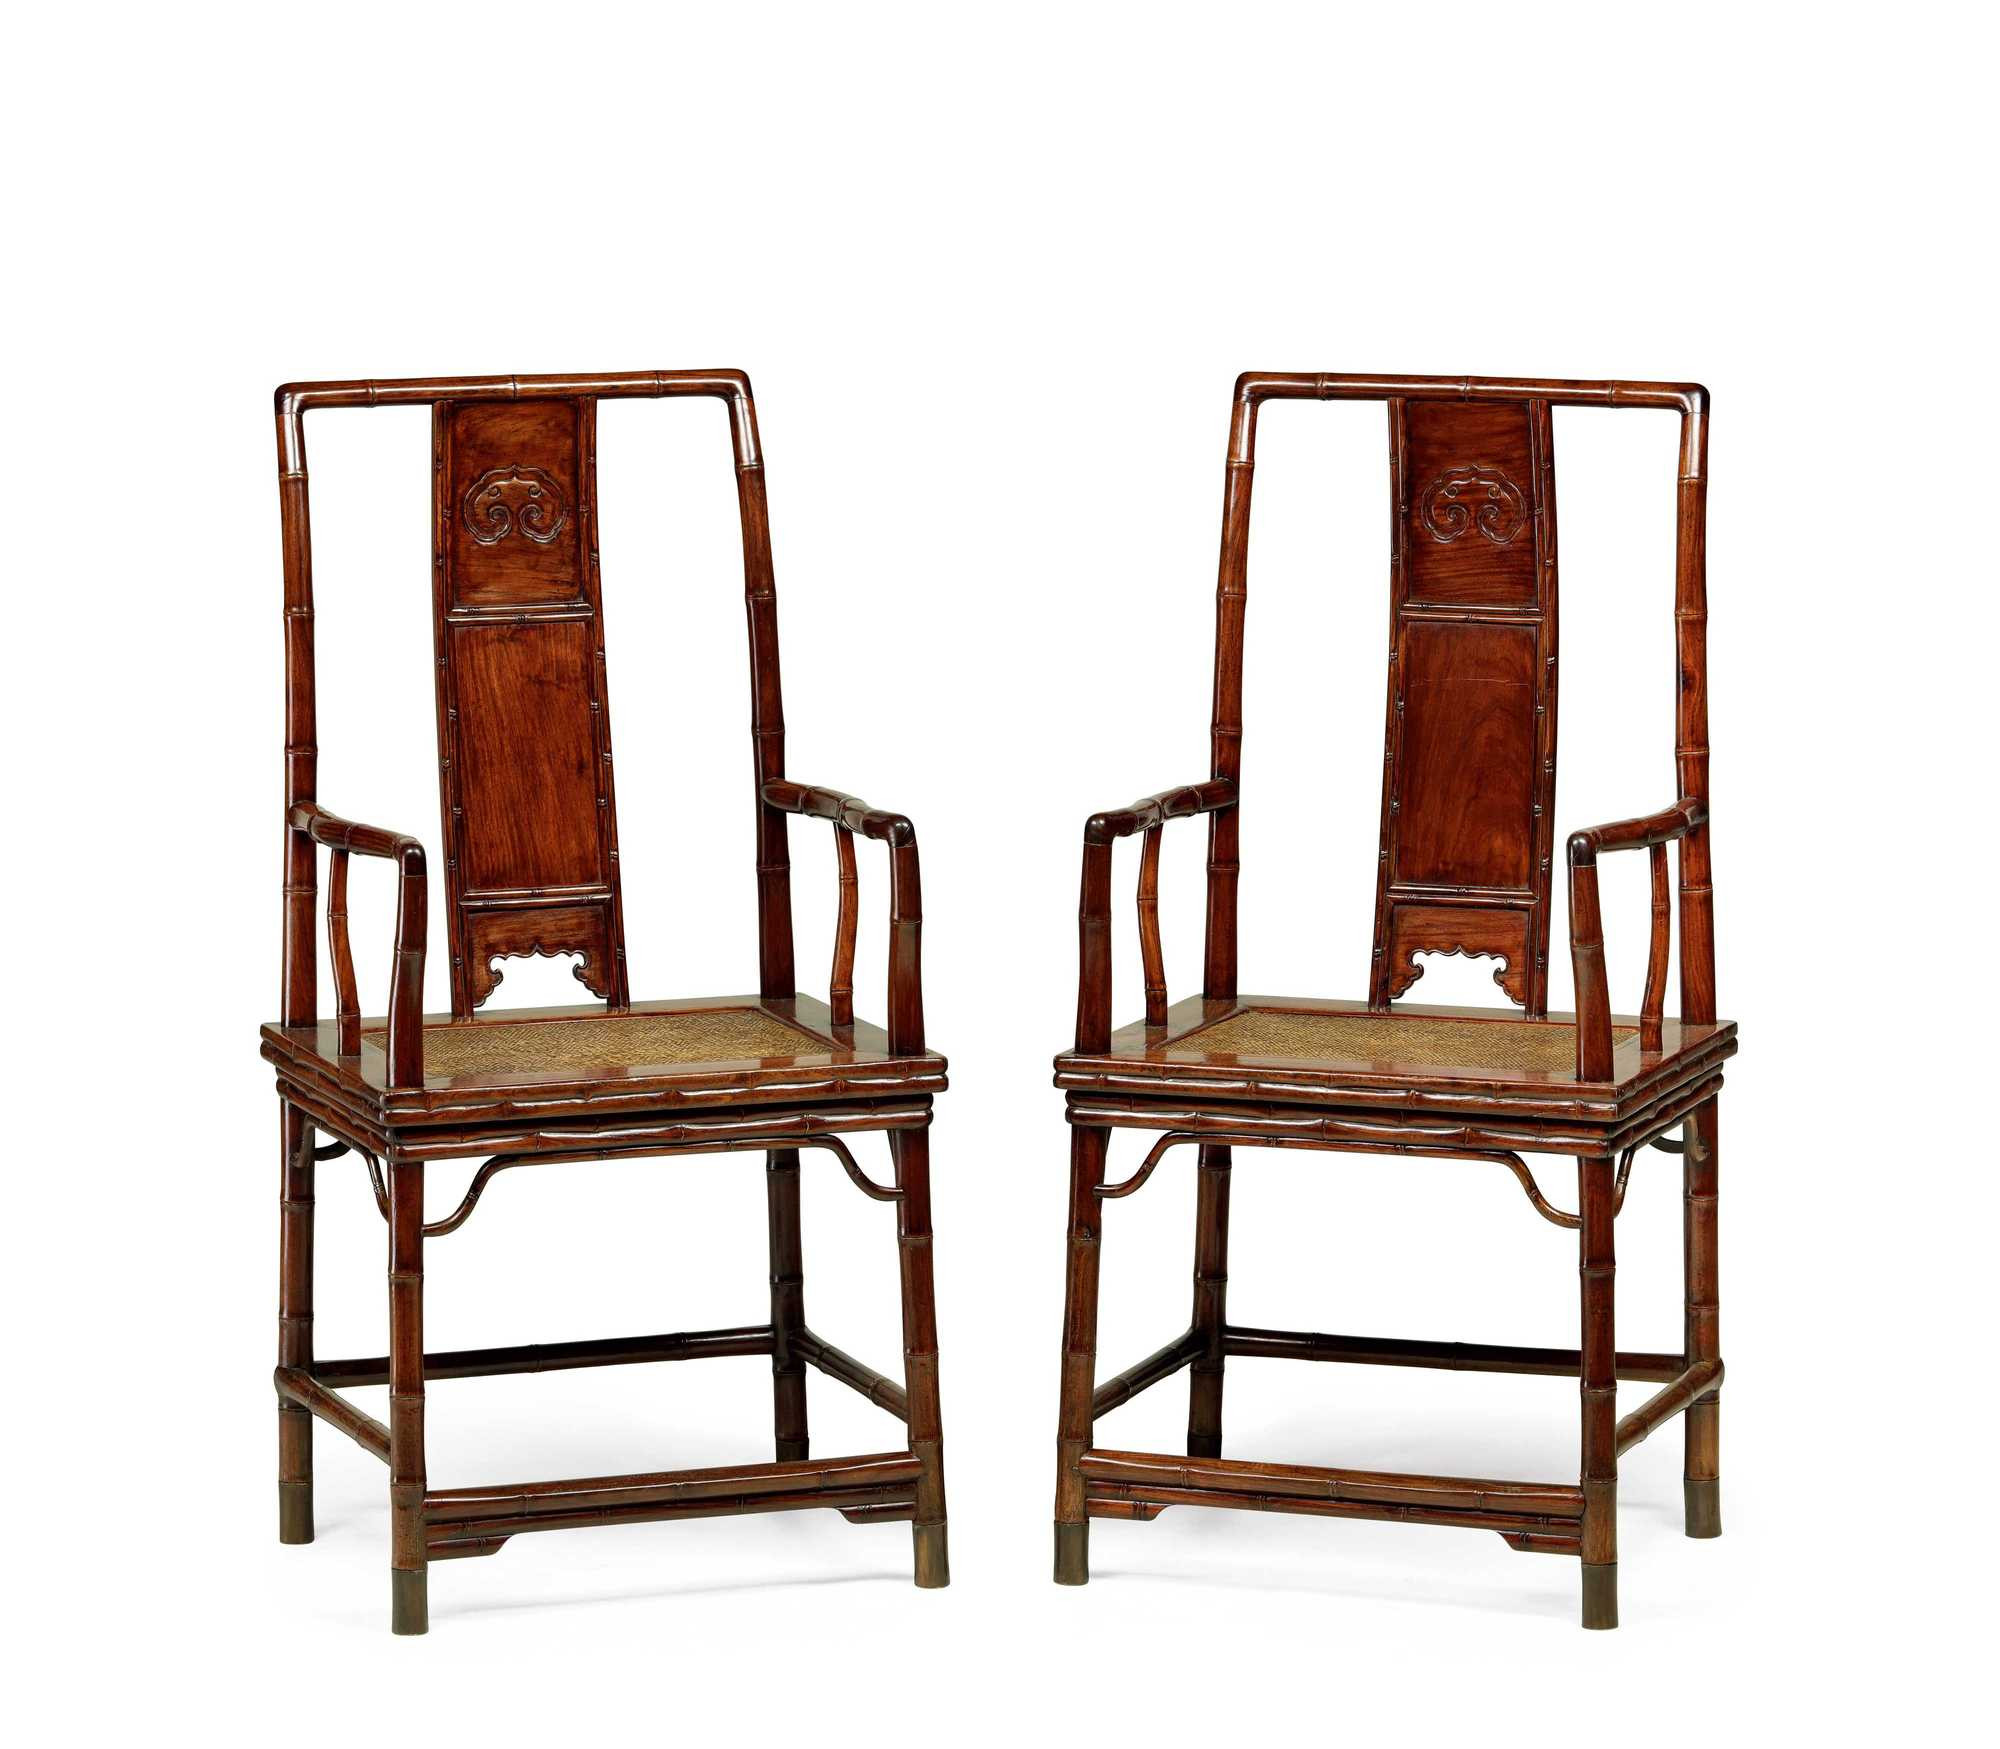 PAIR OF HUANGHUALI WOODEN YOKE-BACKED “OFFICIAL’S HAT” ARMCHAIRS IN BAMBOO JOINT DESIGN